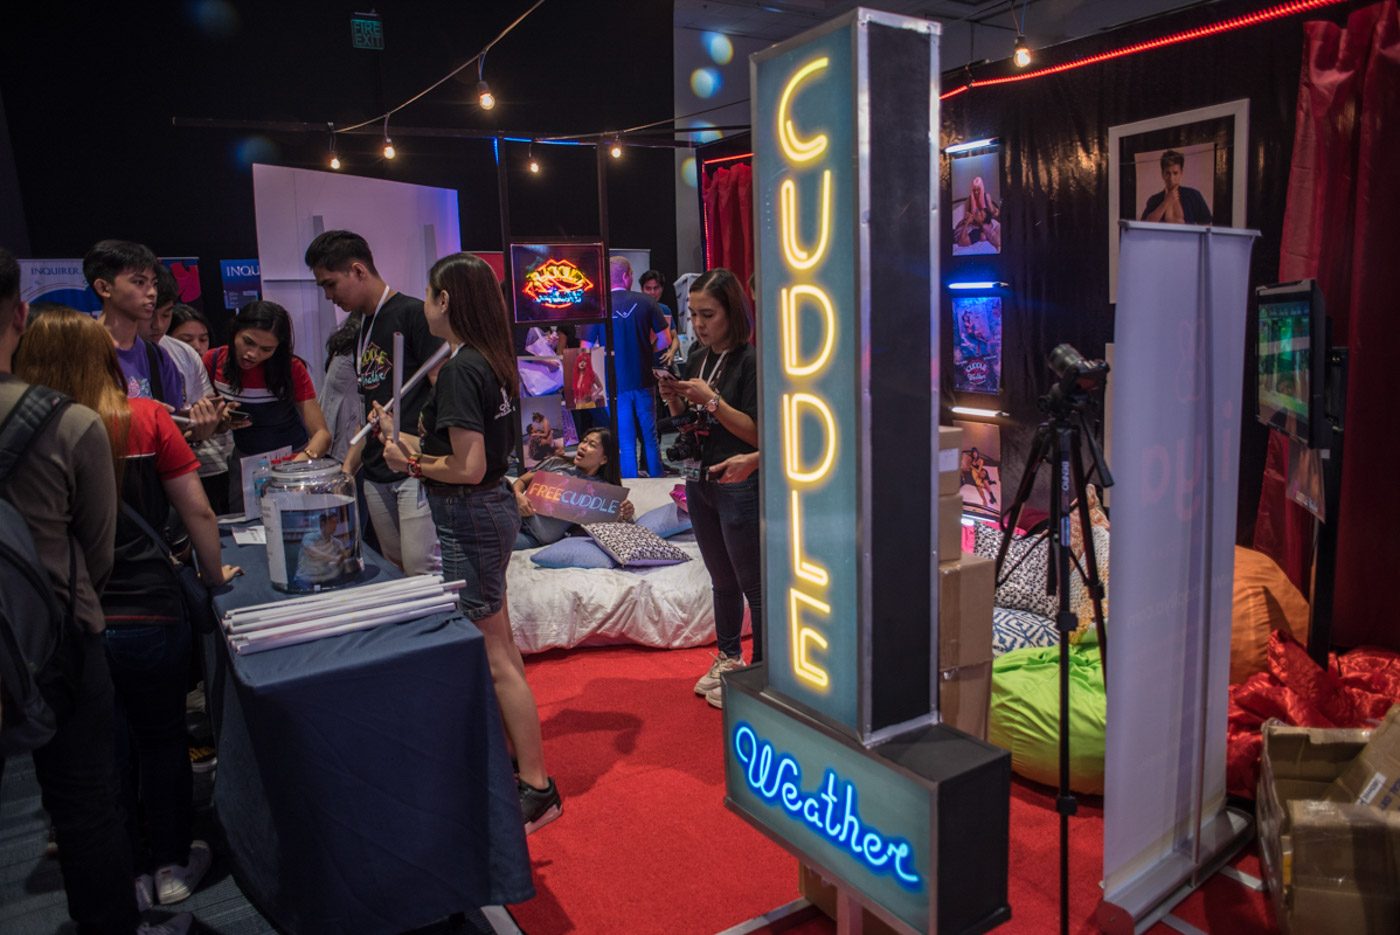 FREE CUDDLES. The 'Cuddle Weather' booth at the Fancon. Photo by Rob Reyes/Rappler 